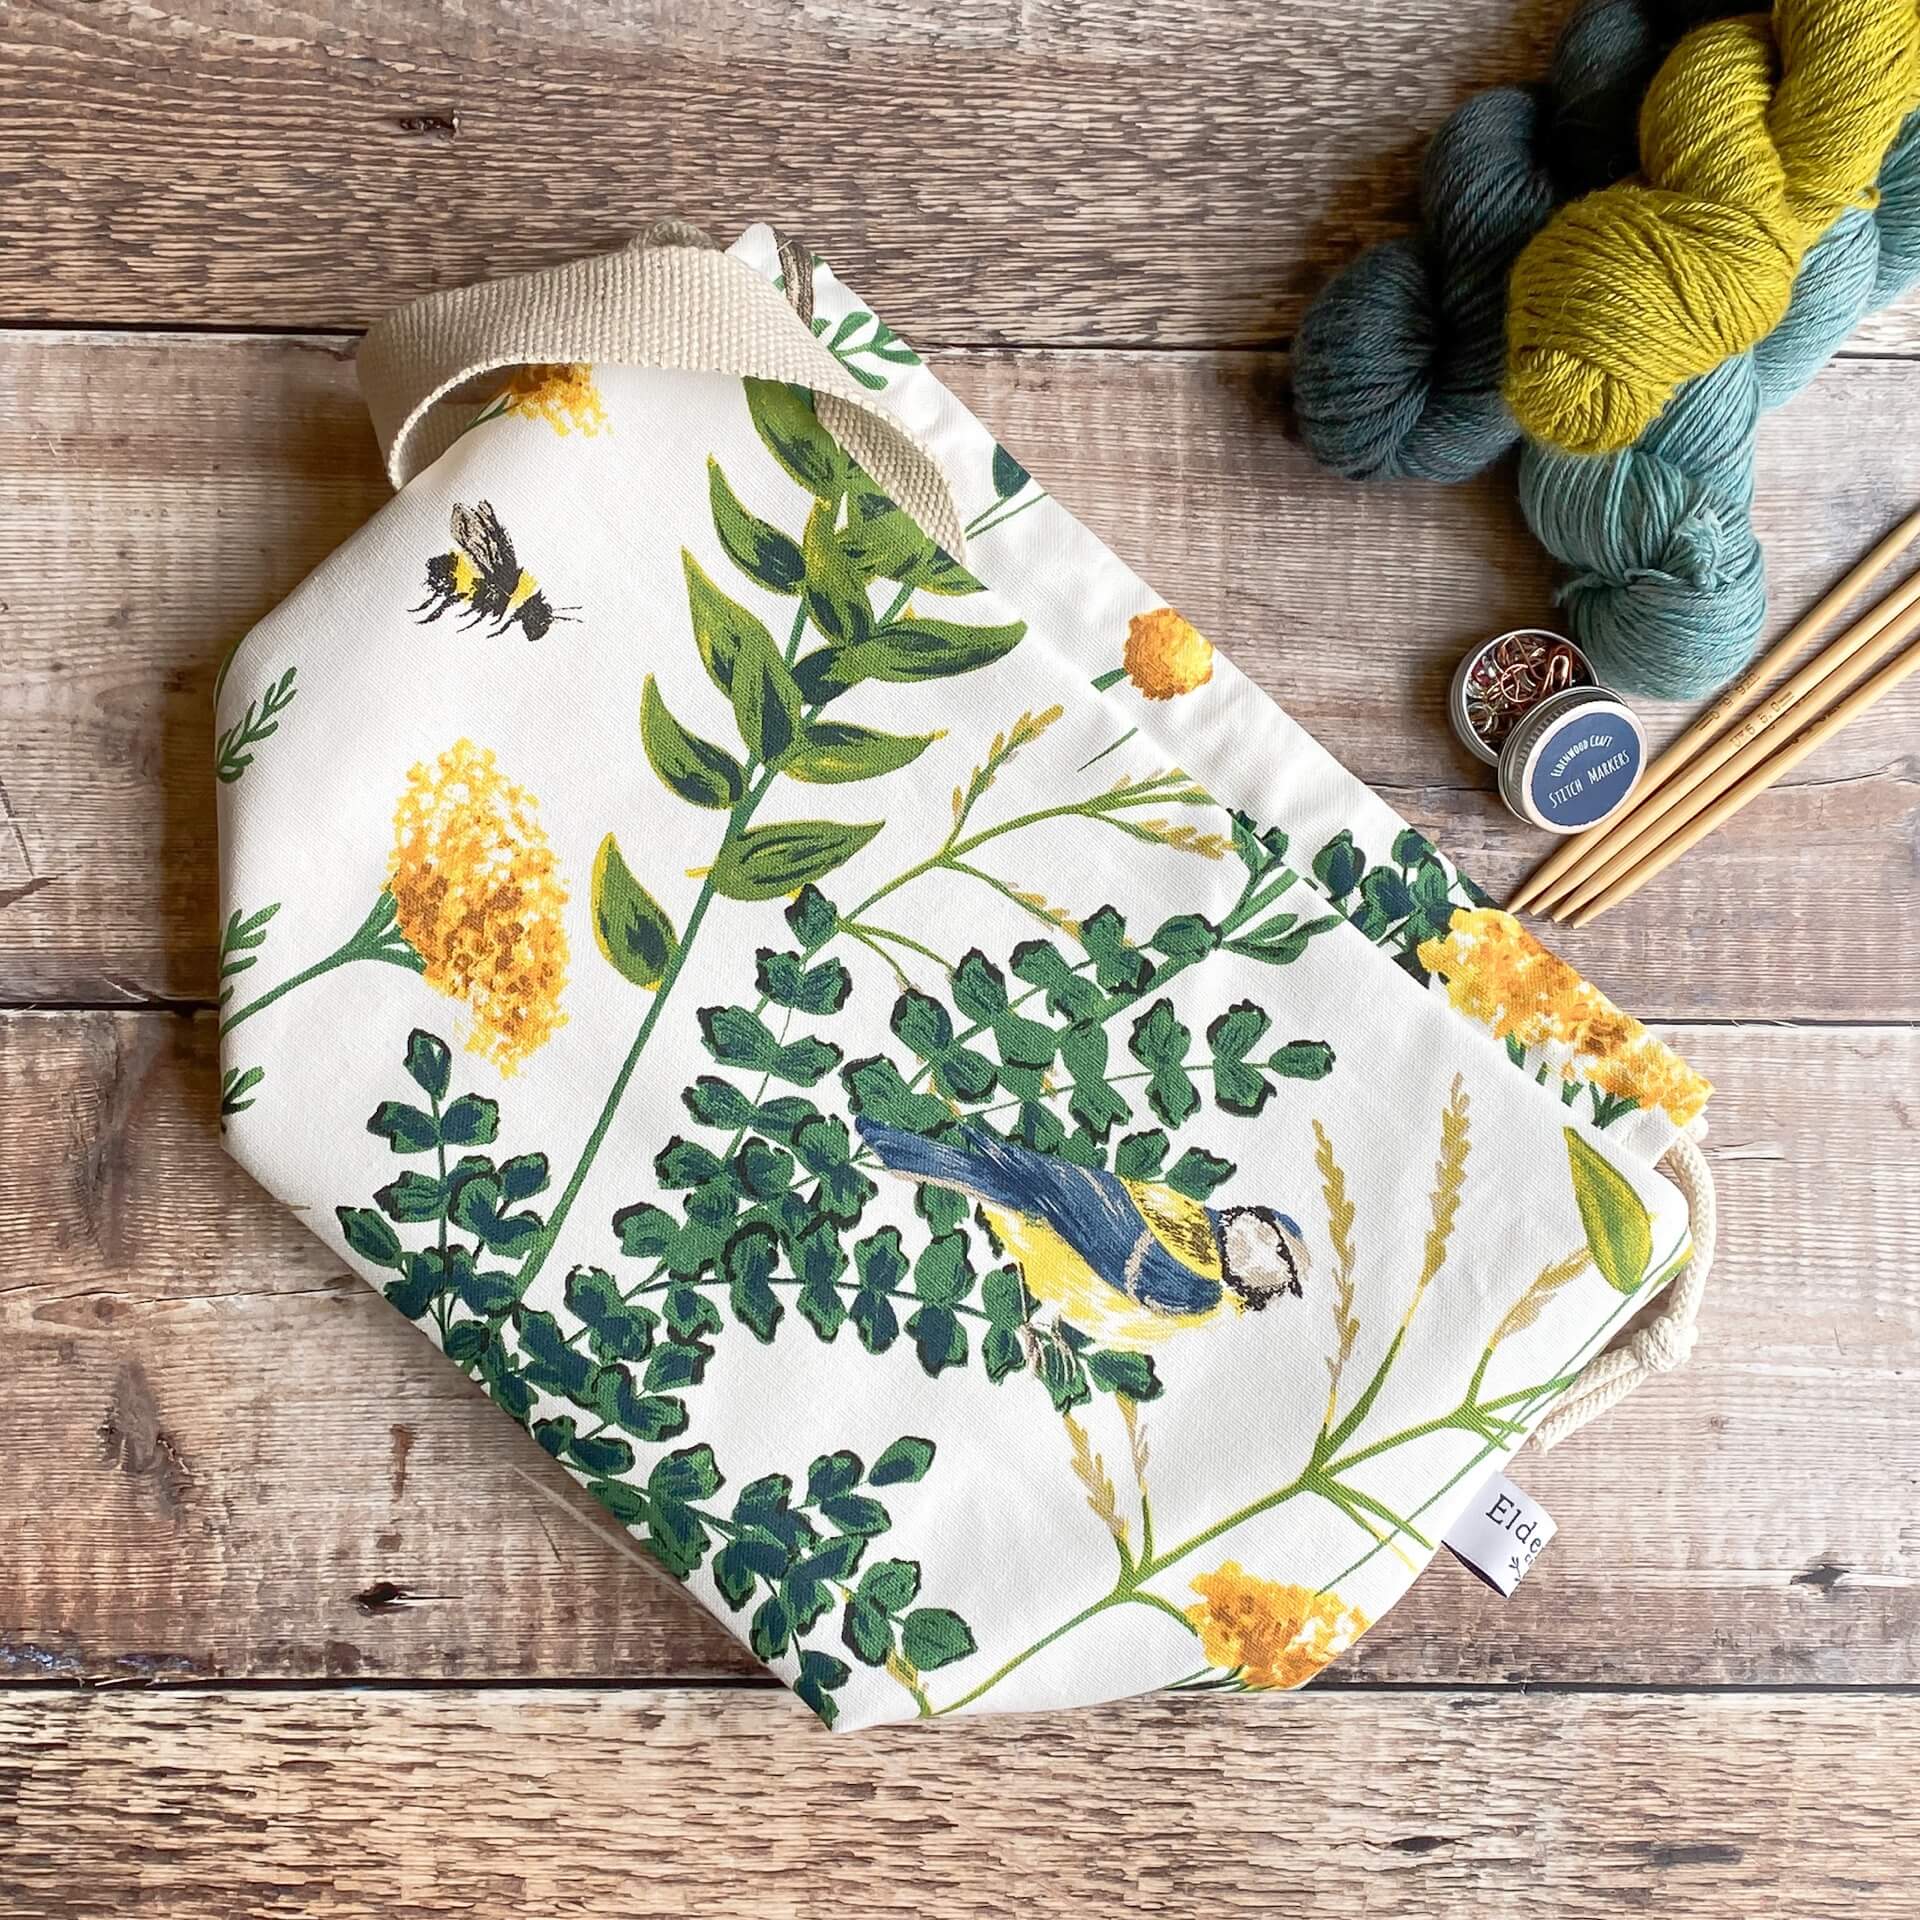 A drawstring bag lies flat on a wooden table next to some hanked up yarn, stitch markers and wooden knitting needles. The bag has a print of a summery scene featuring blue tit birds and bumble bees. 